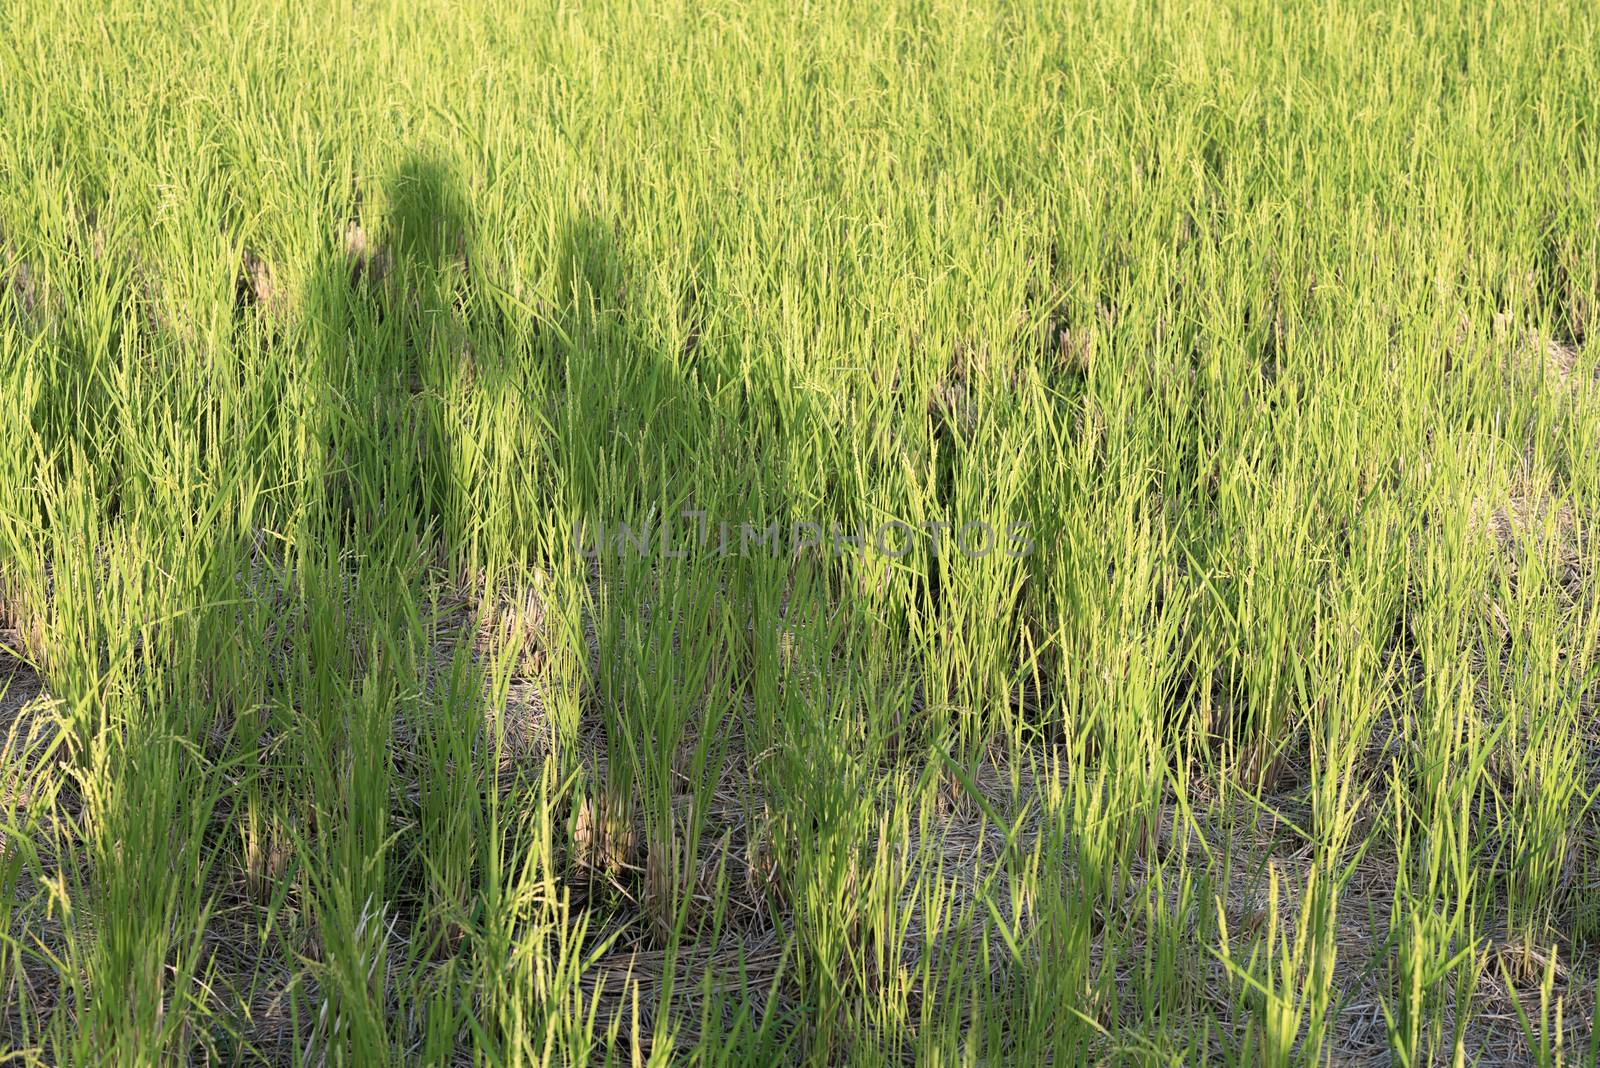 A shadow of a man and woman in a rice field on a sunny day.